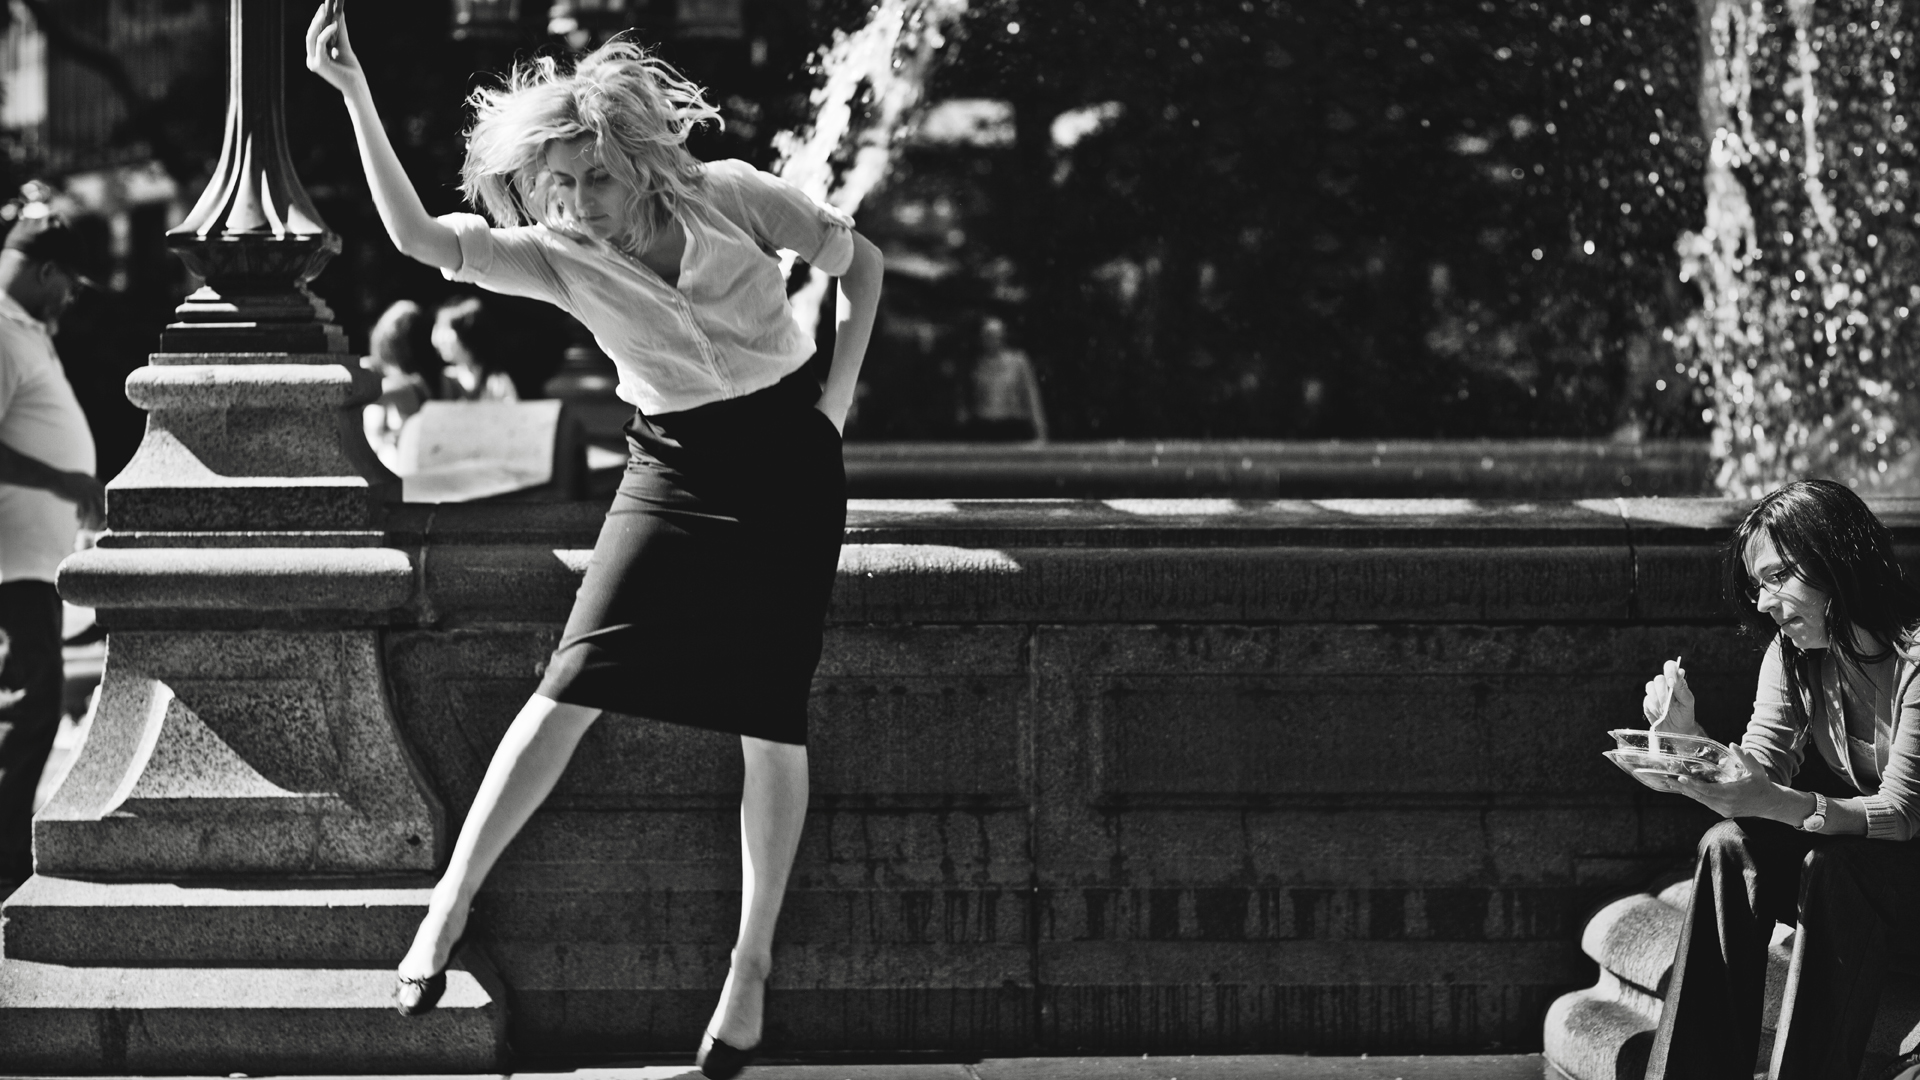 You’re Invited: FREE Screening of Frances Ha